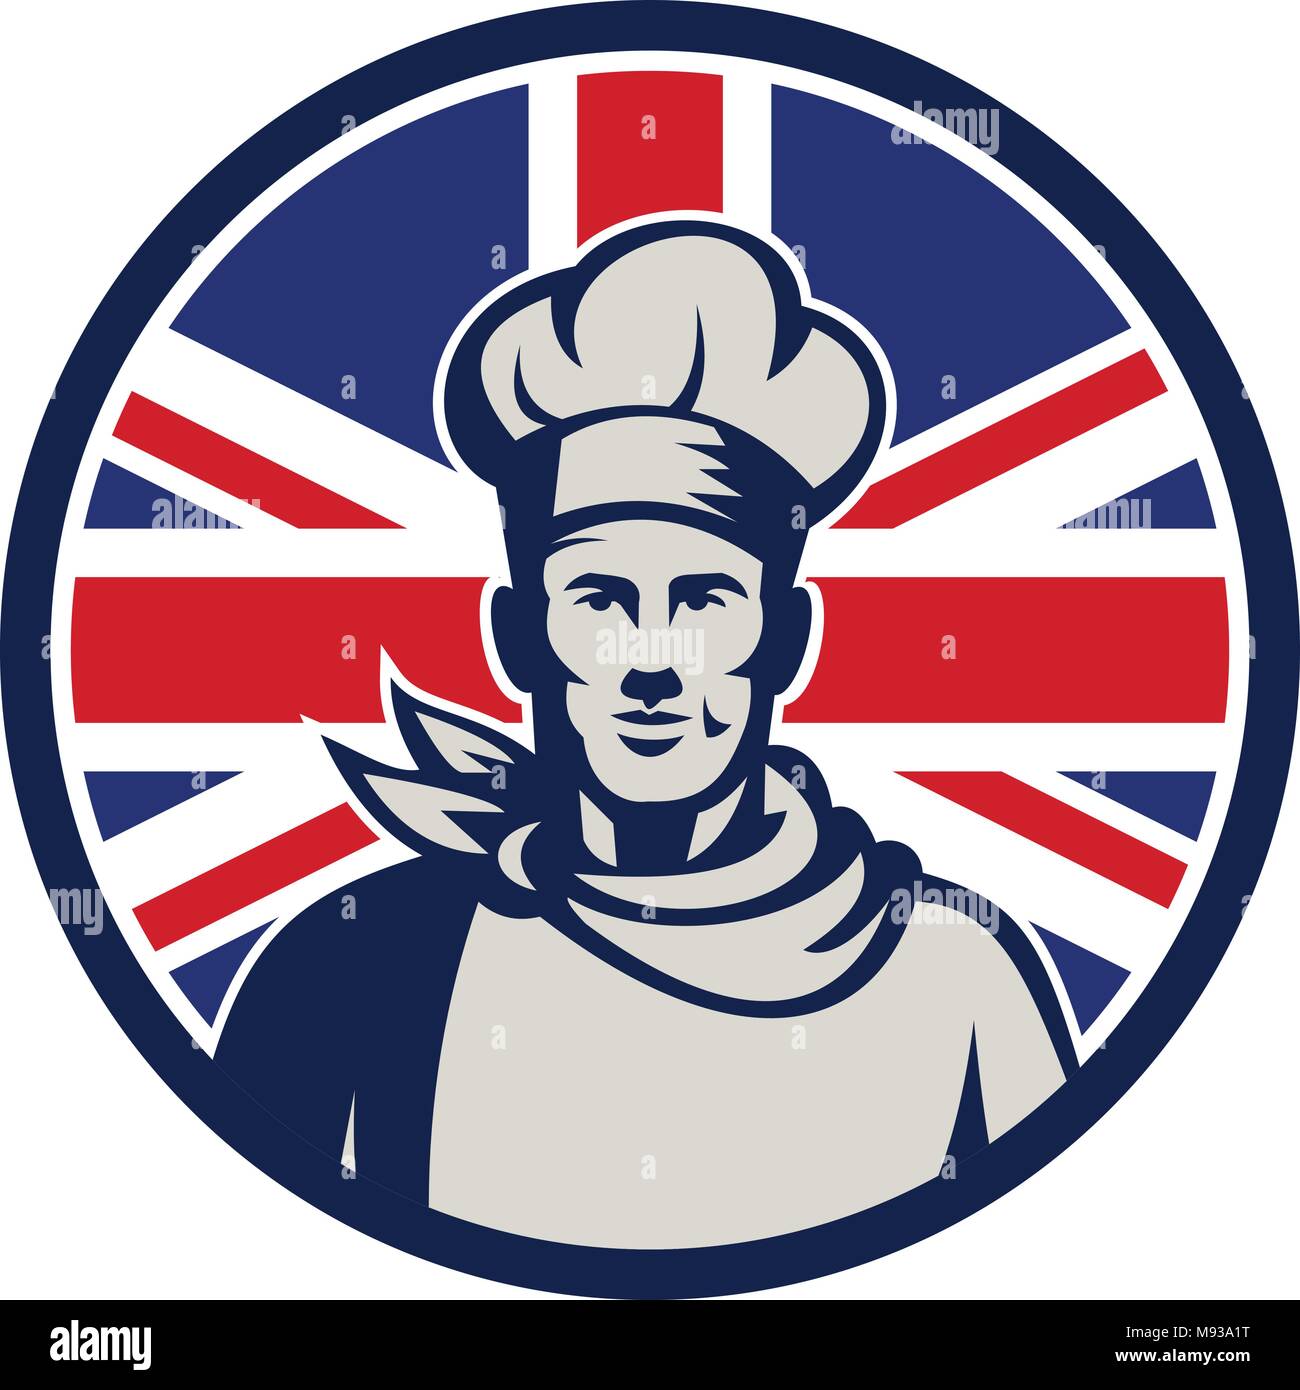 Icon retro style illustration of a male British baker, chef or cook from waist up viewed from front with United Kingdom UK, Great Britain Union Jack f Stock Vector